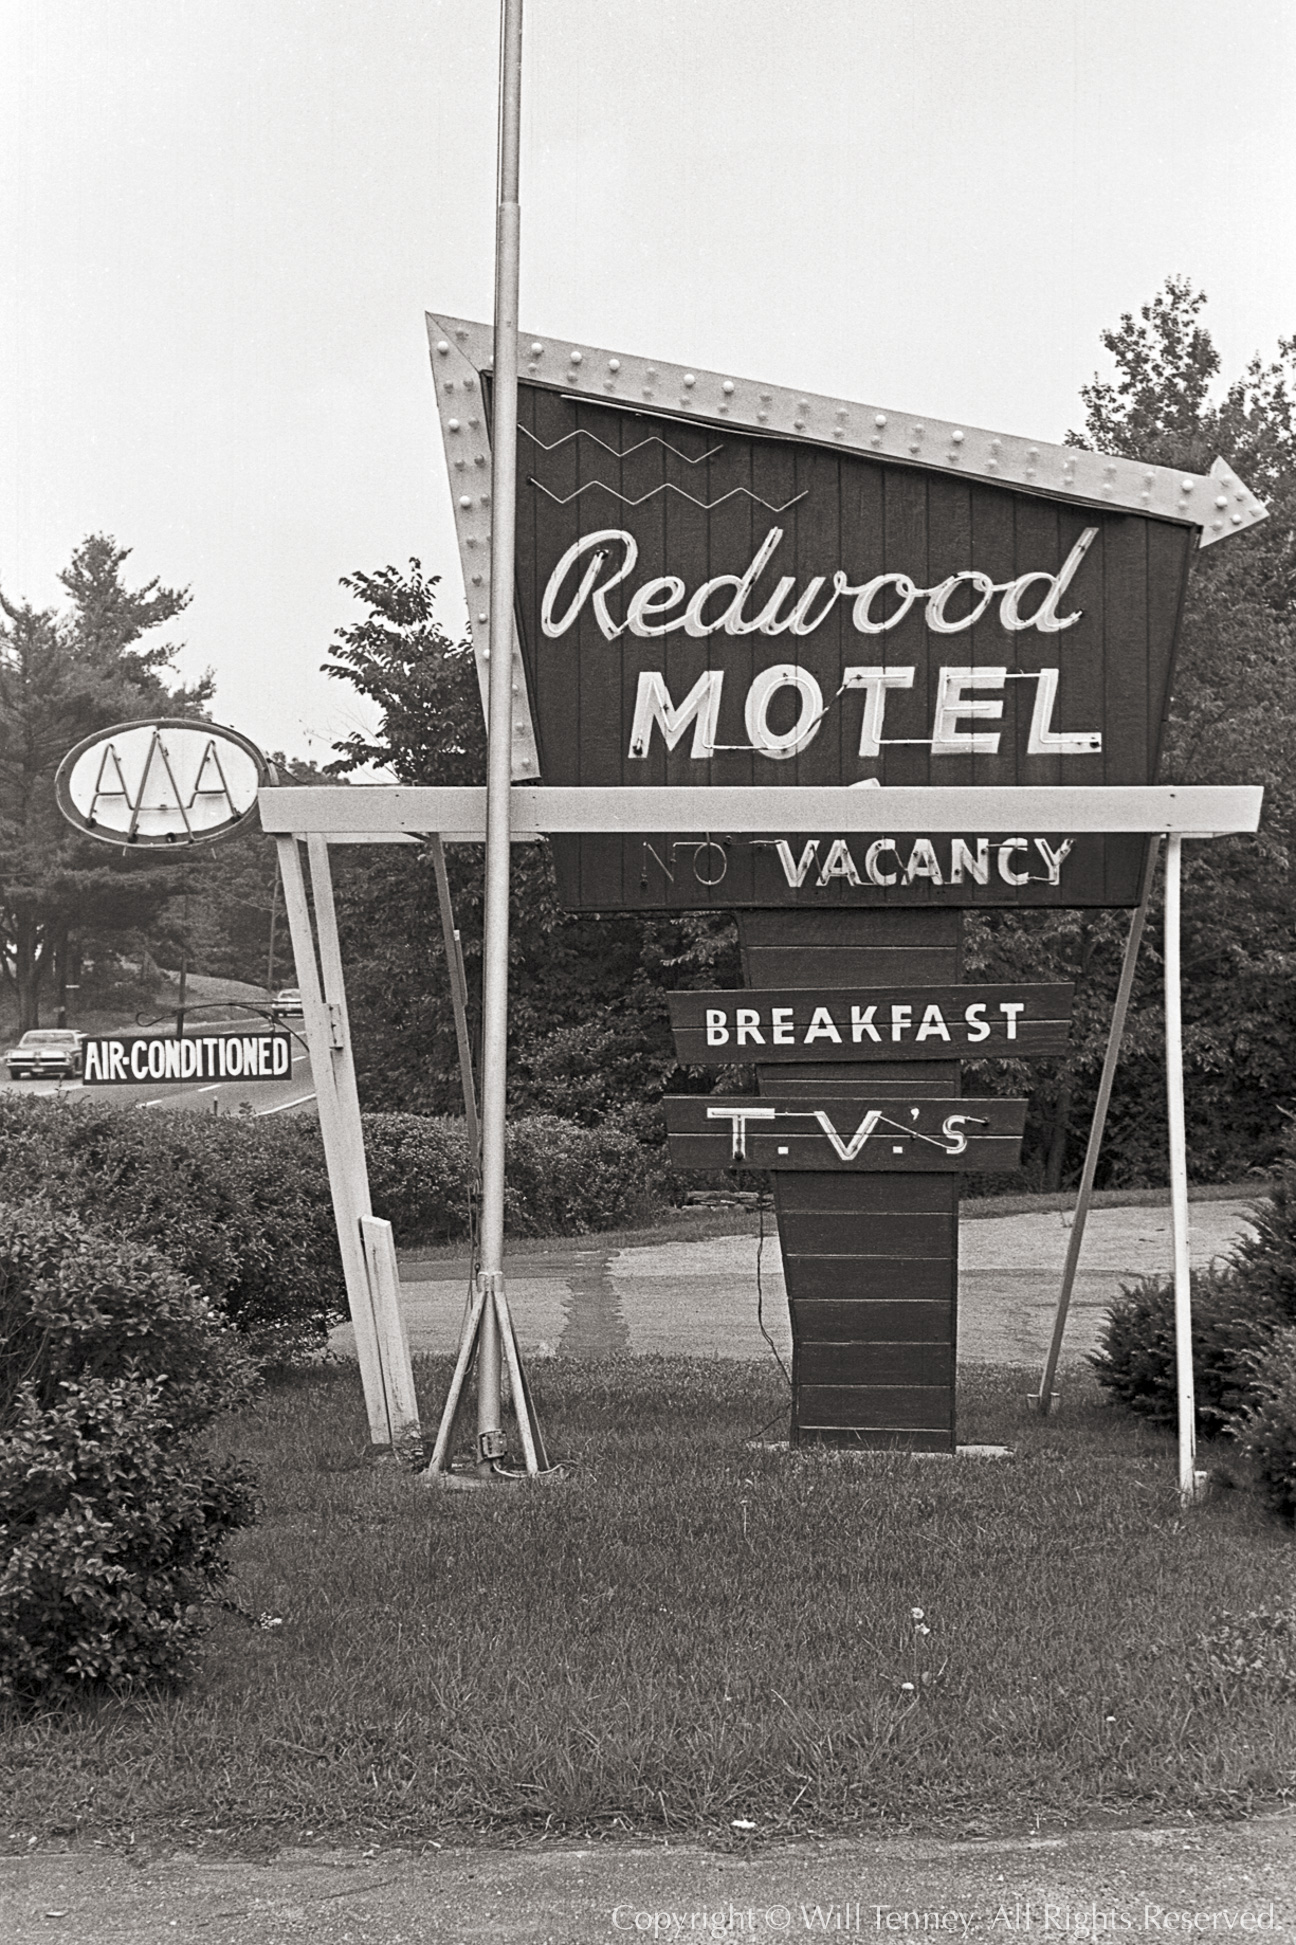 Redwood Motel: Photograph by Will Tenney